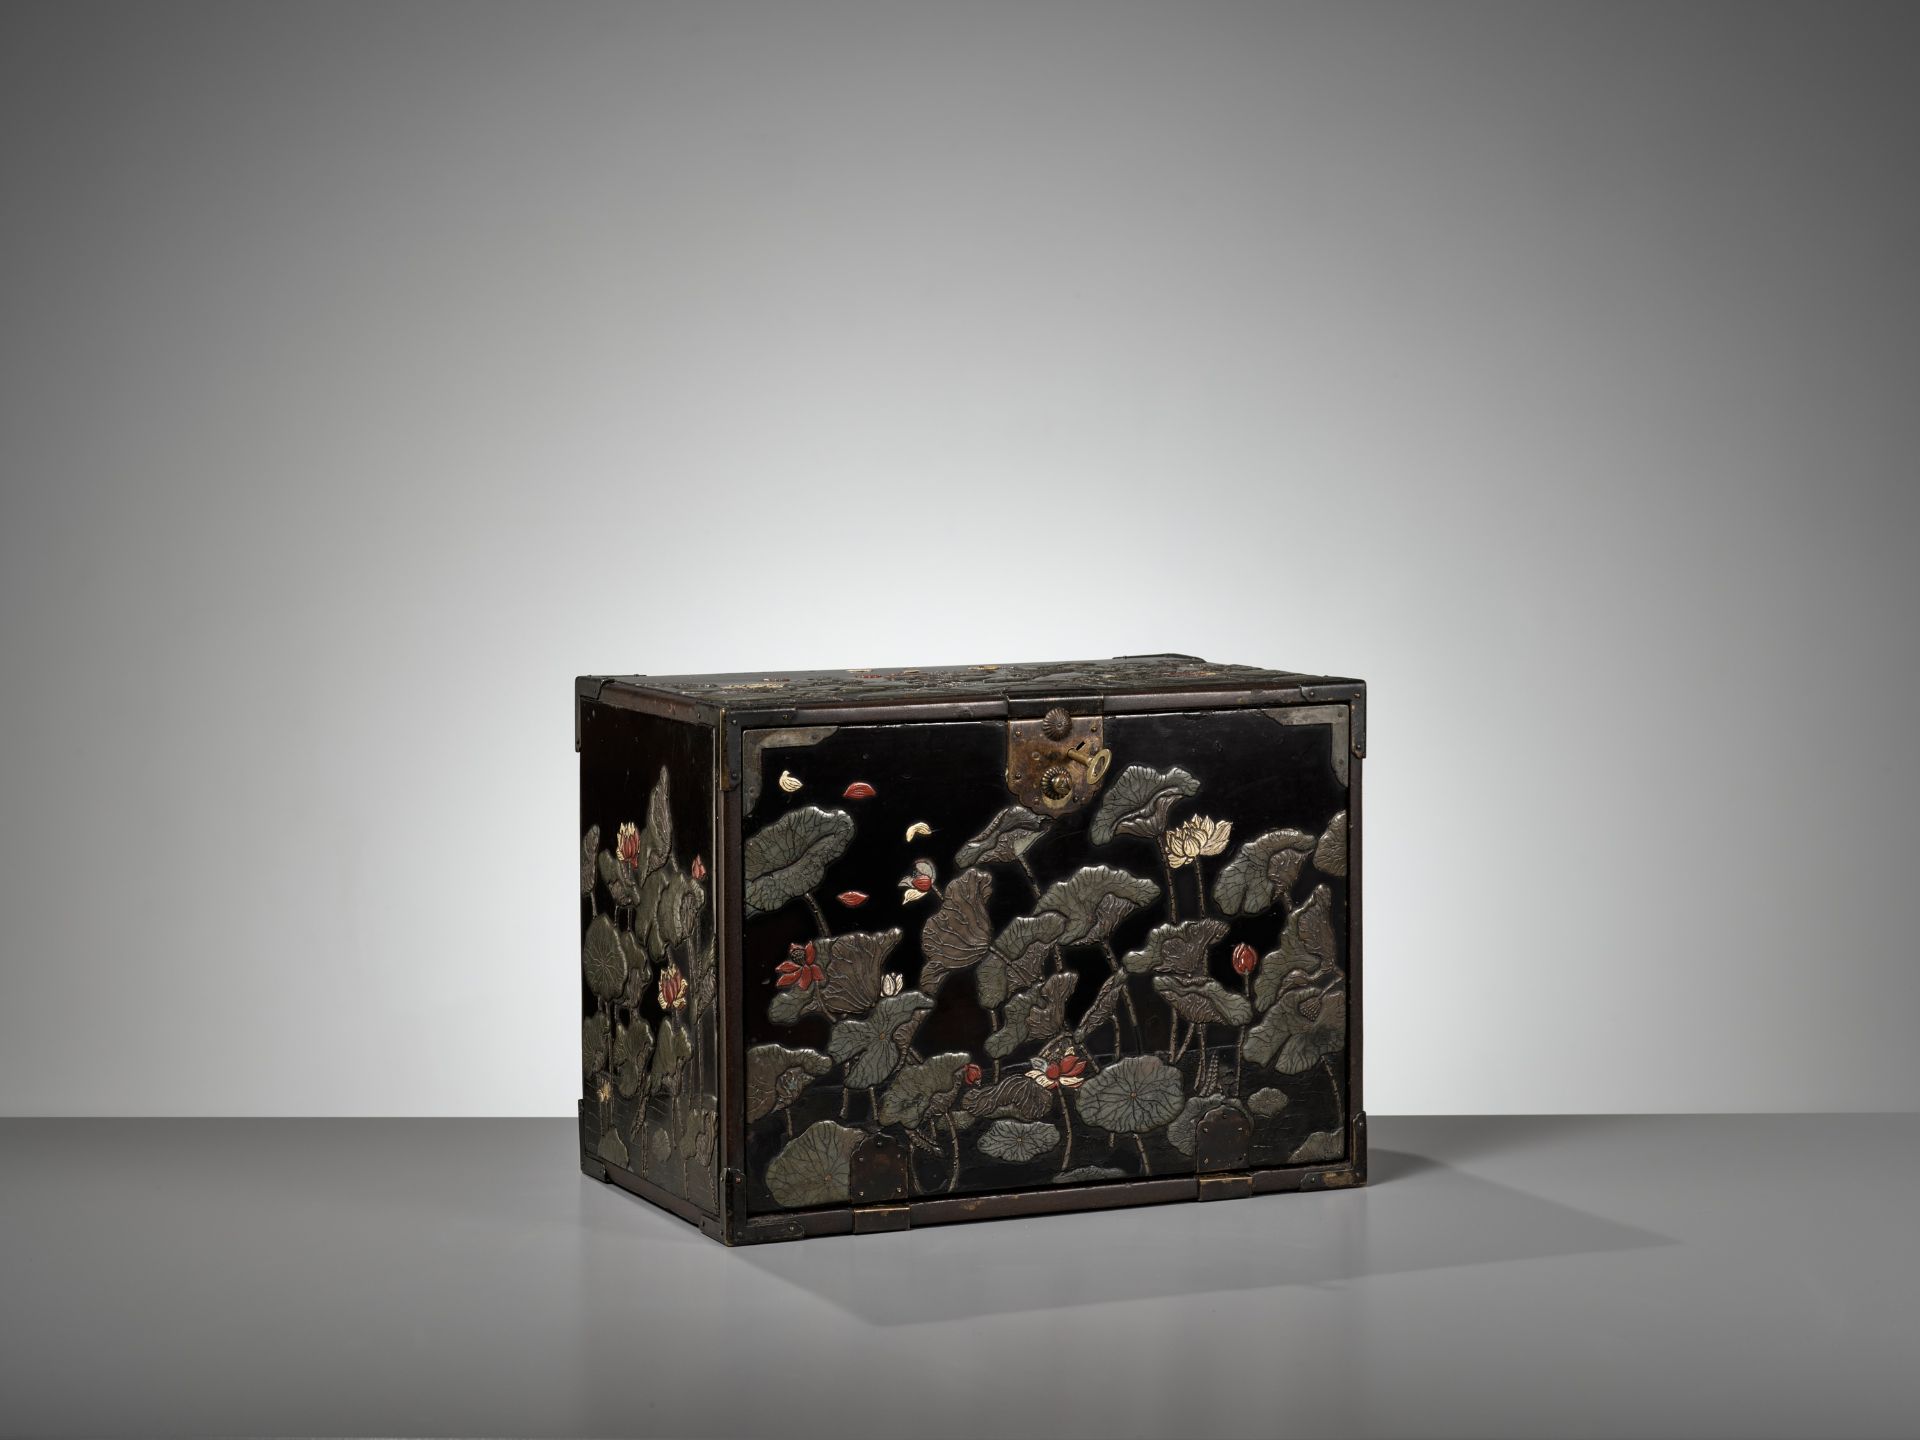 A RITSUO STYLE CERAMIC-INLAID AND LACQUERED WOOD KODANSU (CABINET) WITH A LOTUS POND AND EGRETS - Image 11 of 14